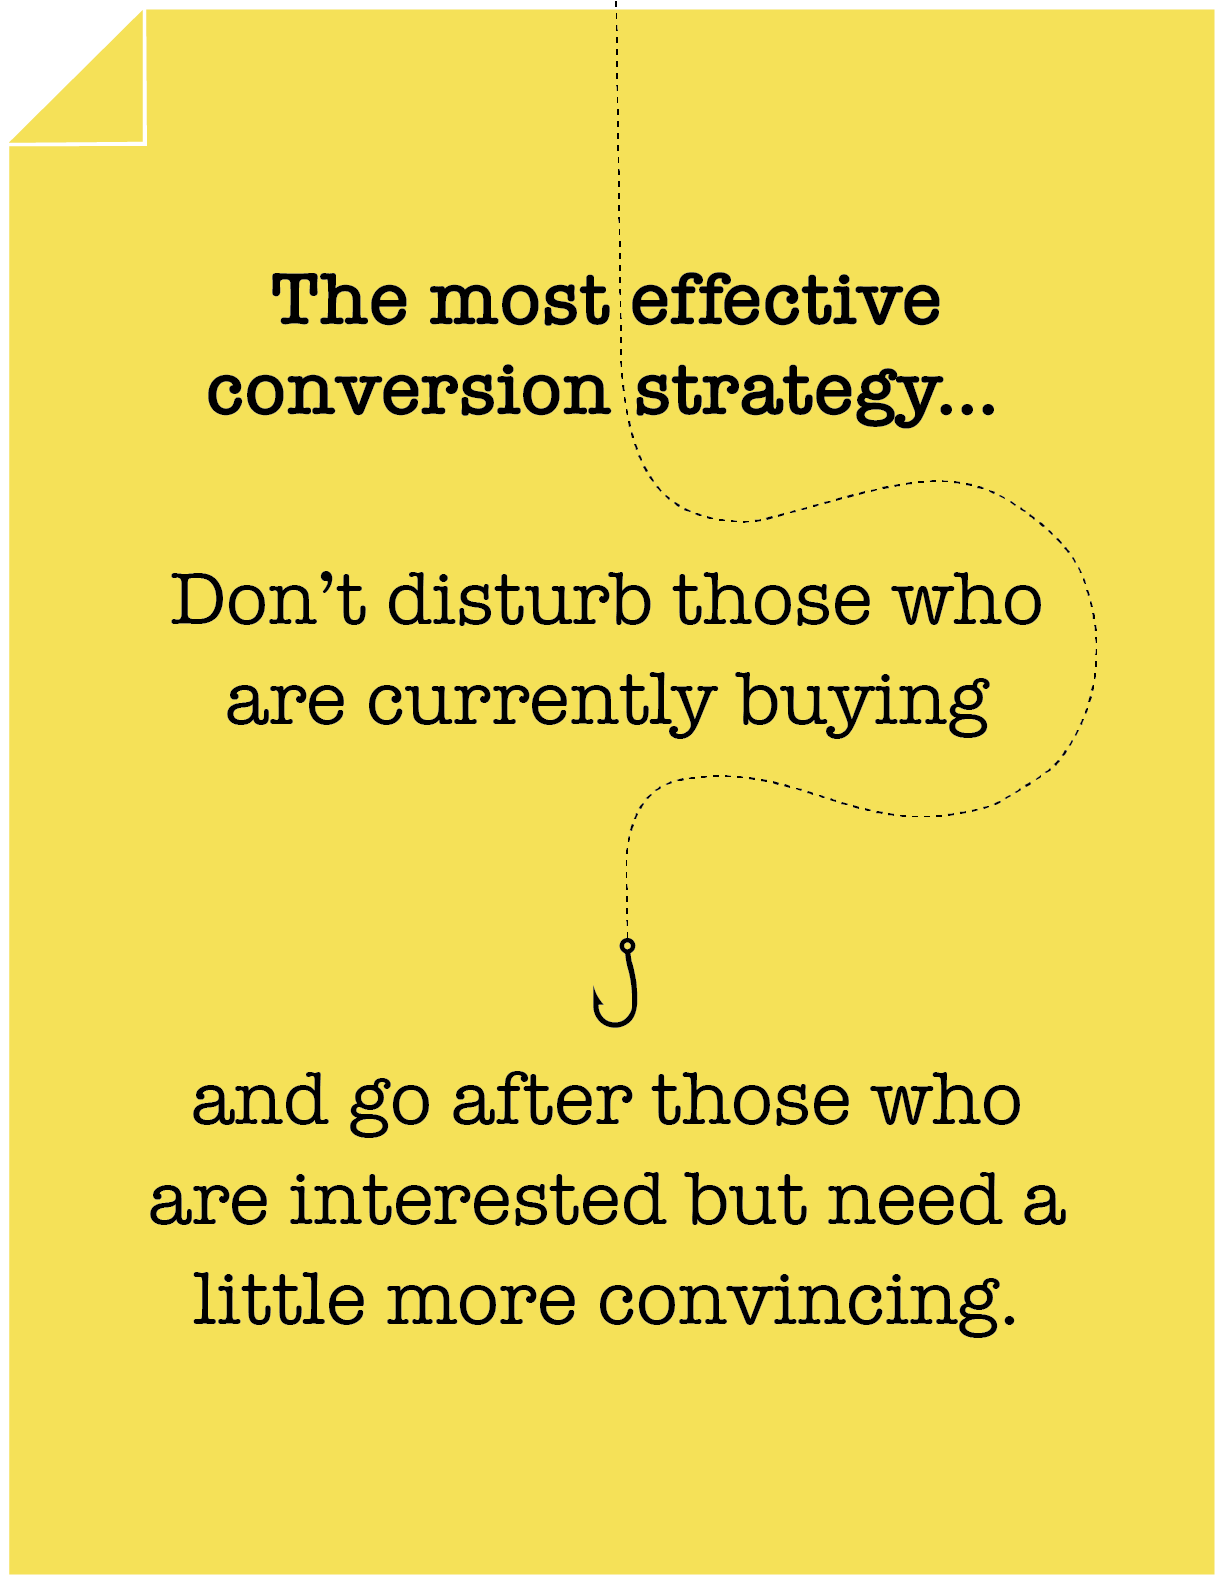 Don't Disturb Those Who Are Buying — Target Those Who Need More Convincing